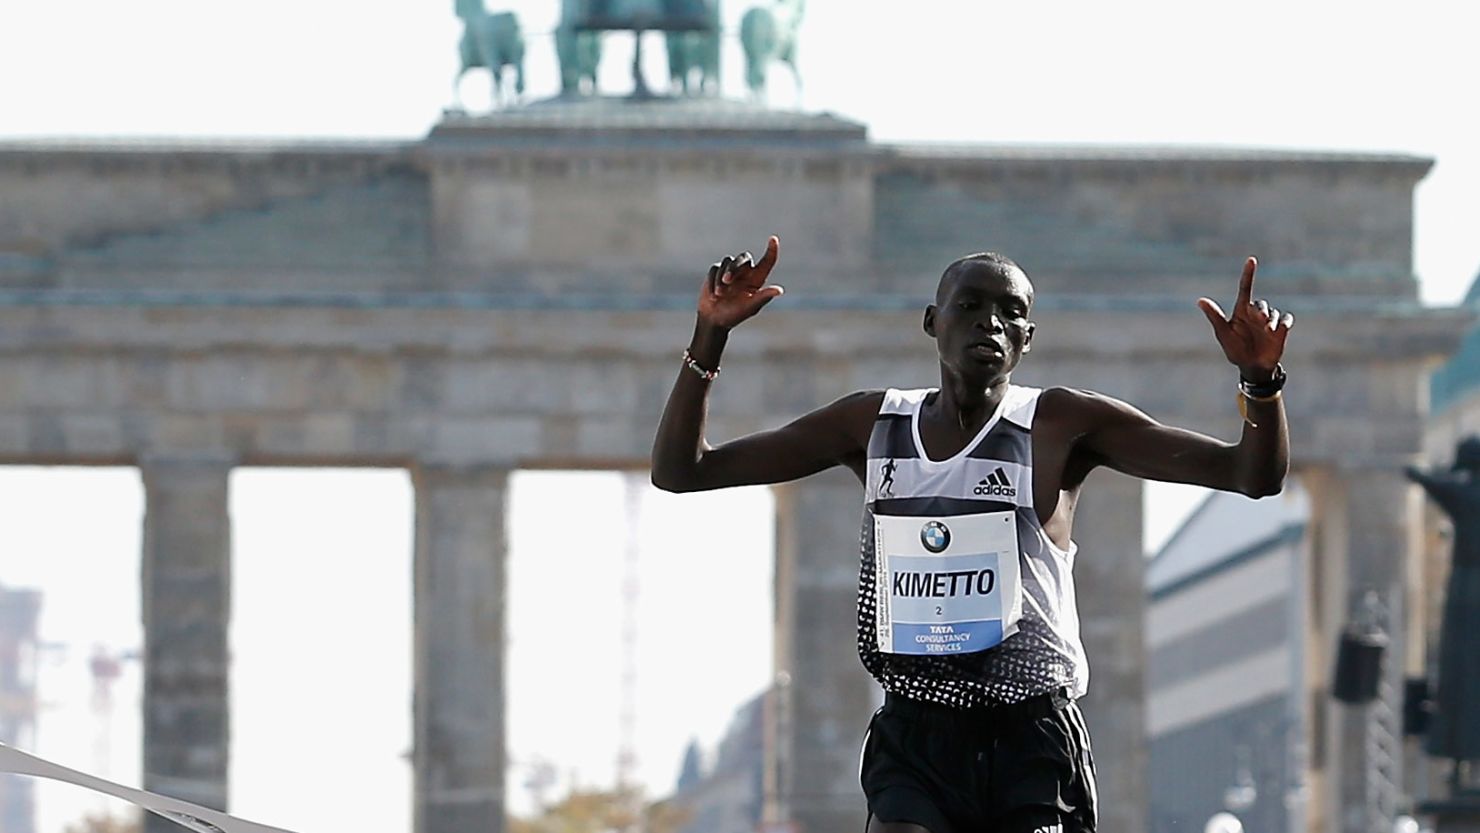 Kenya's Dennis Kimetto breasts the tape in front of the Brandenberg Gate as he sets a new world record in the marathon.